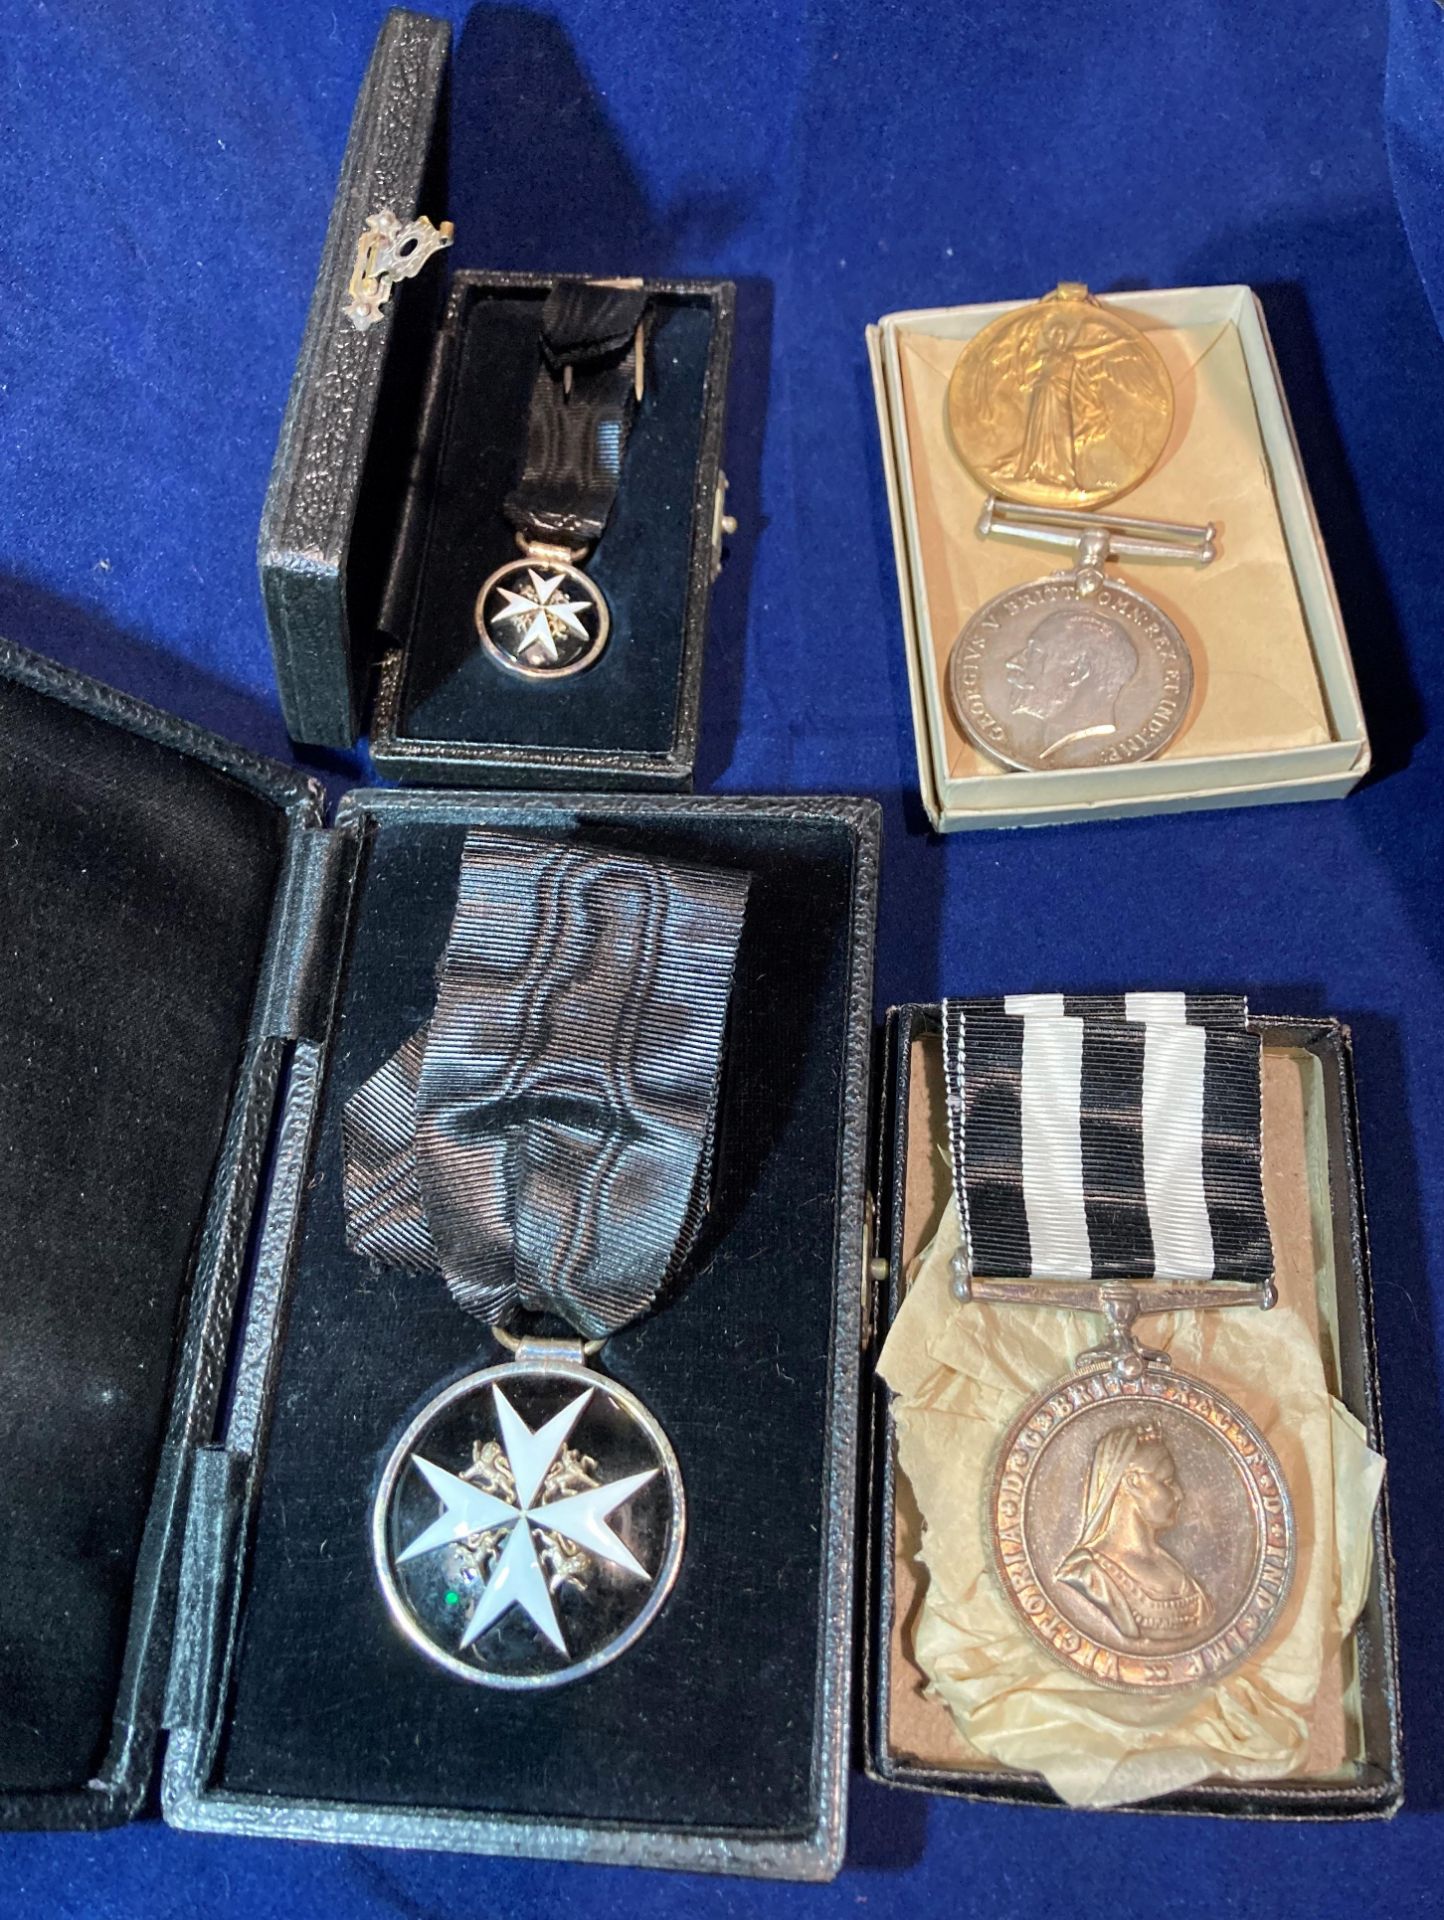 Contents to tray - two First World War medals - British World War Medal 1914-1918 and Victory Medal - Image 2 of 13